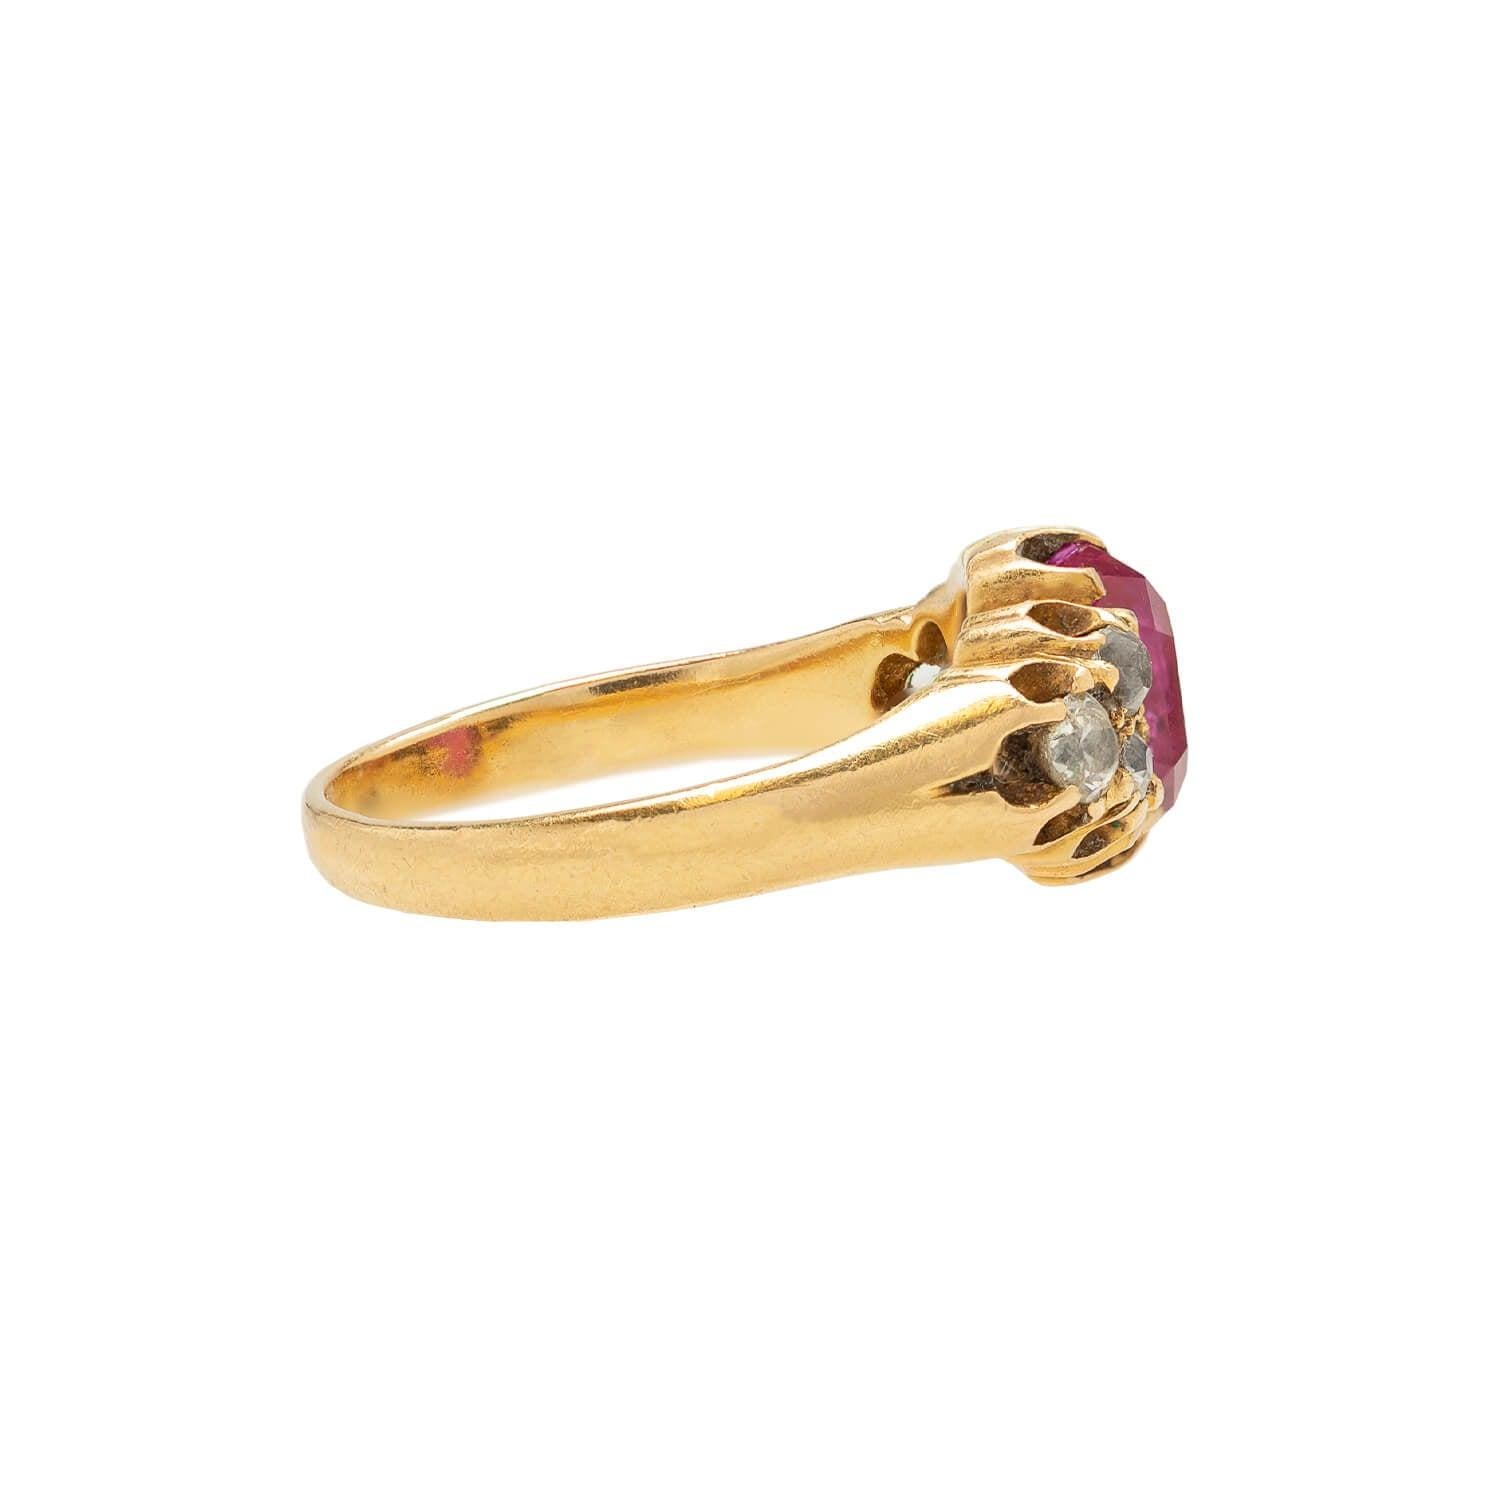 A beautiful gemstone ring from the Victorian (ca1890s) era! This gorgeous piece is crafted in rich 18k yellow gold and features a beautiful ruby amongst sparkling diamonds. Set in the center is a single estimated 2.20ctw certified oval-cut Burmese